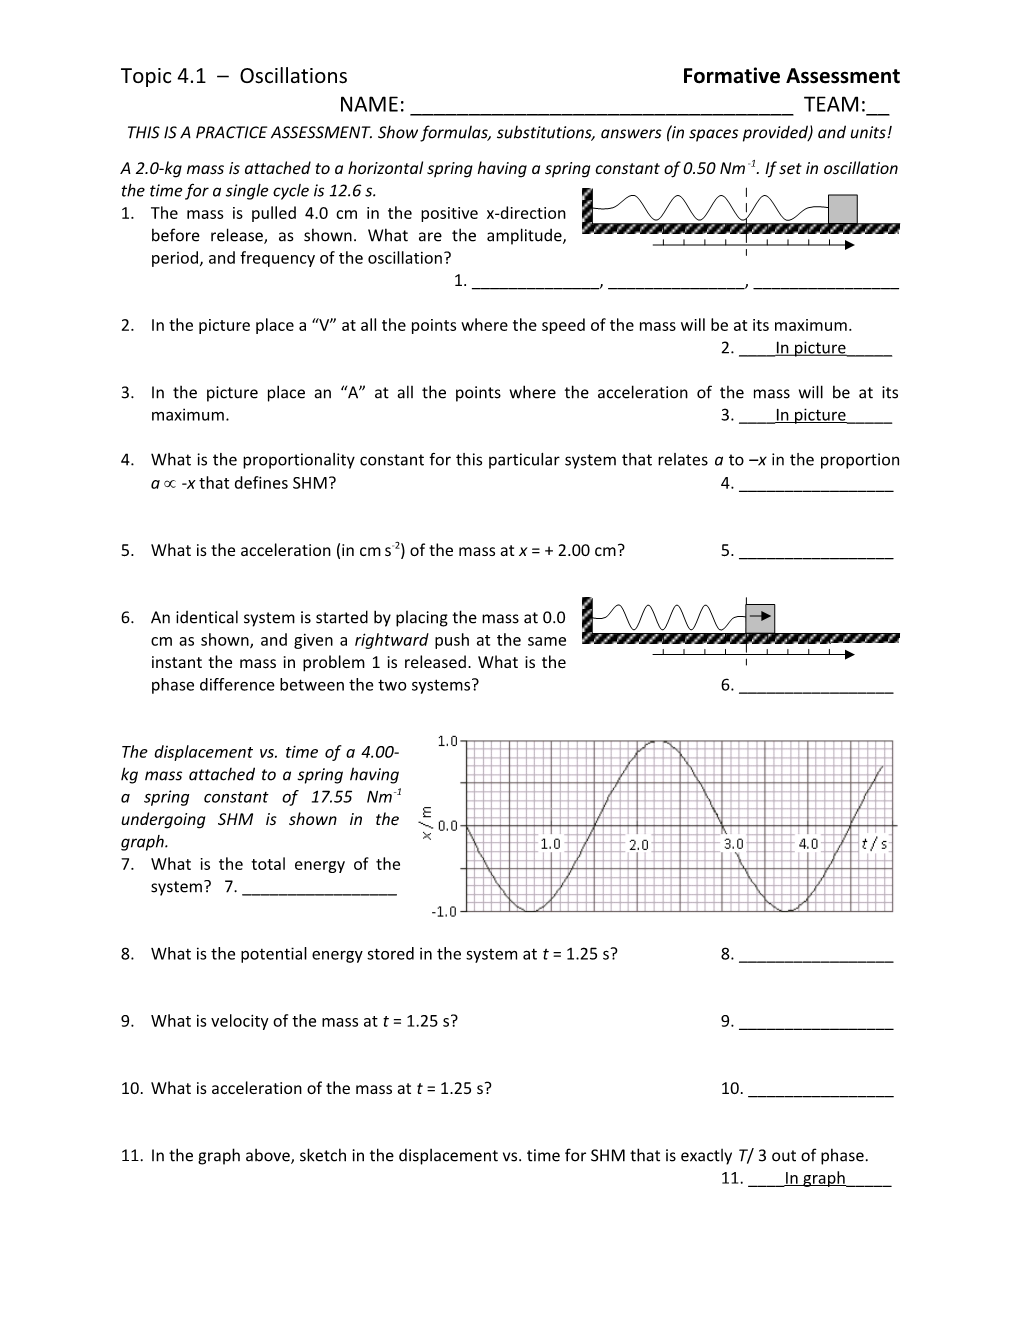 Topic 4.5 Standing Waves Formative Assessment